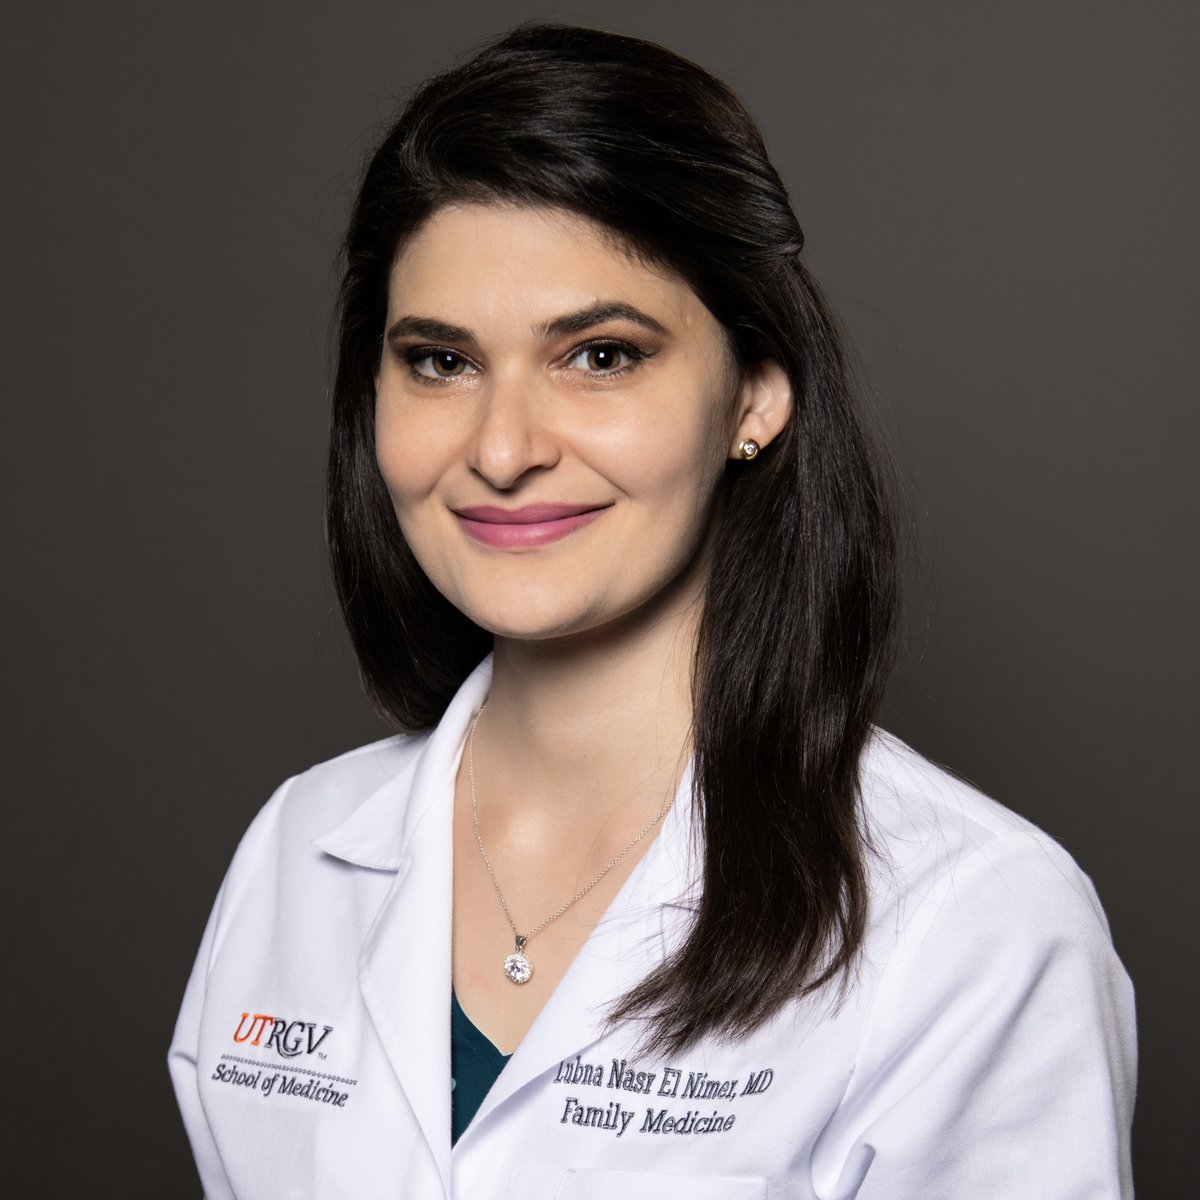 Dr. Lubna Nasr El Nimer, PGY-3, has been honored as Member of the Month by the Texas Academy of Family Physicians (TAFP)! 🌟 Congratulations, Dr. Lubna Nasr El Nimer, on your well-deserved recognition from TAFP! 👏 #UTRGVSOM #TAFP #AcademicMedicine @AAMCtoday